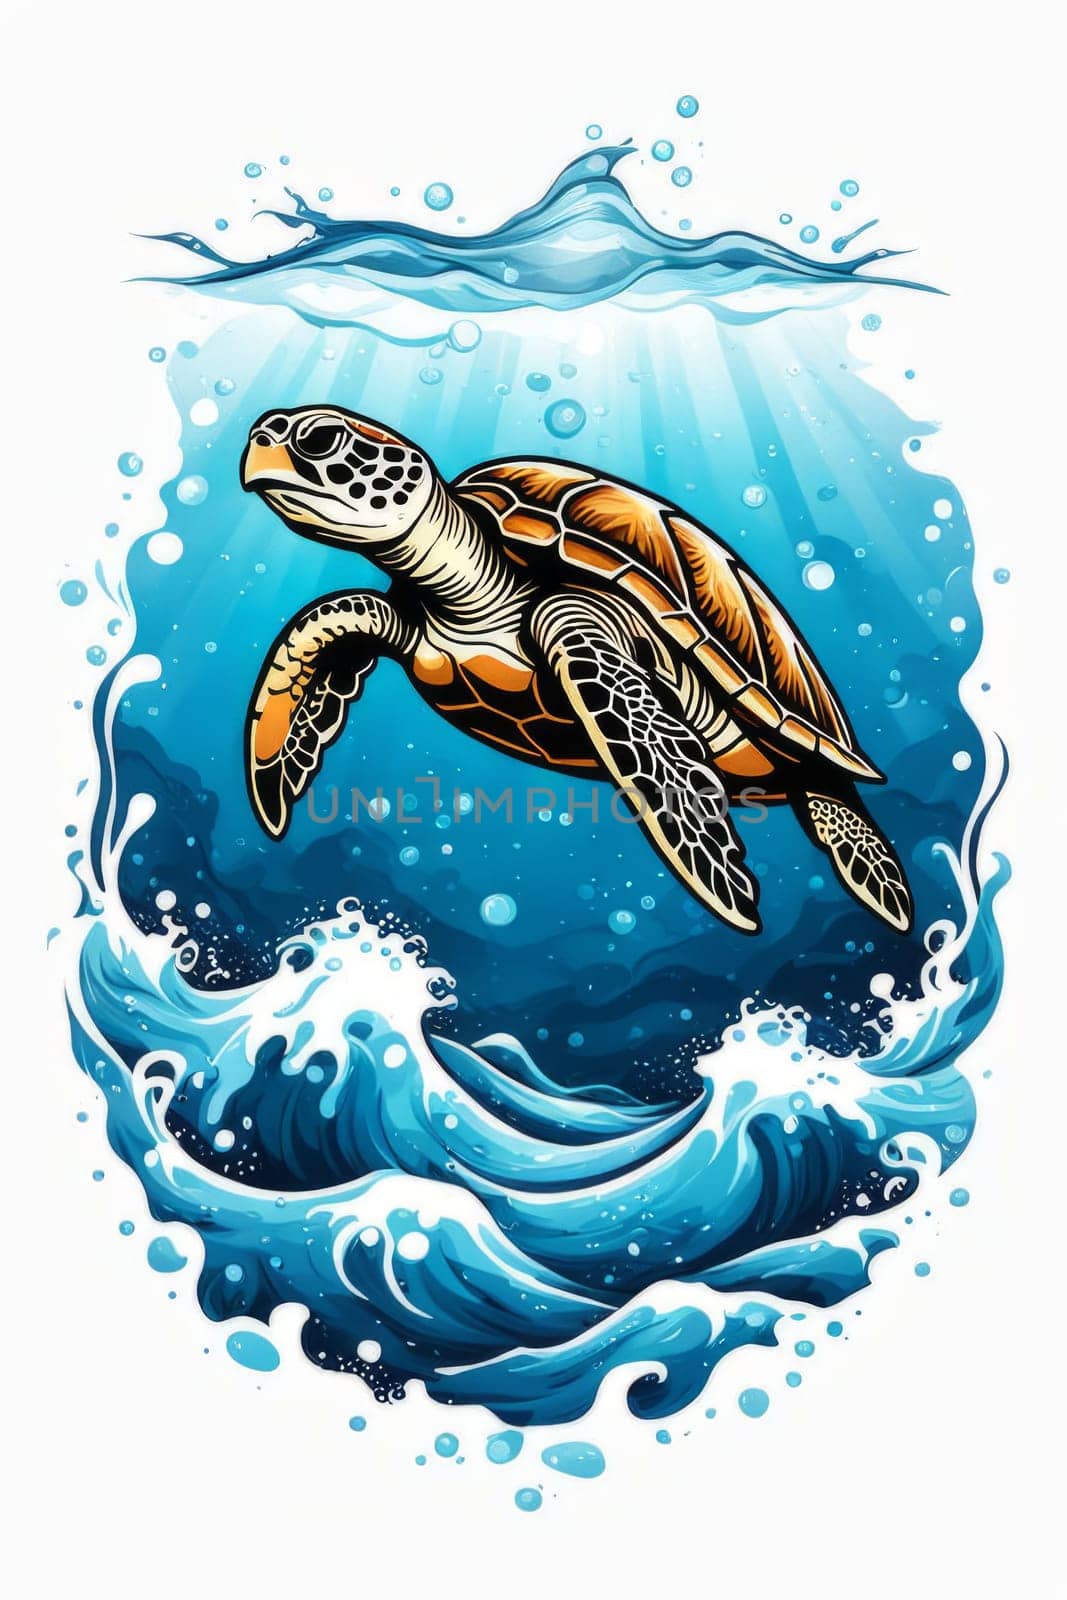 Turtle riding wave on white background. For Tshirt design, posters, postcards, other merchandise with marine theme, childrens books, educational materials for kids, tourism, stationery. by Angelsmoon